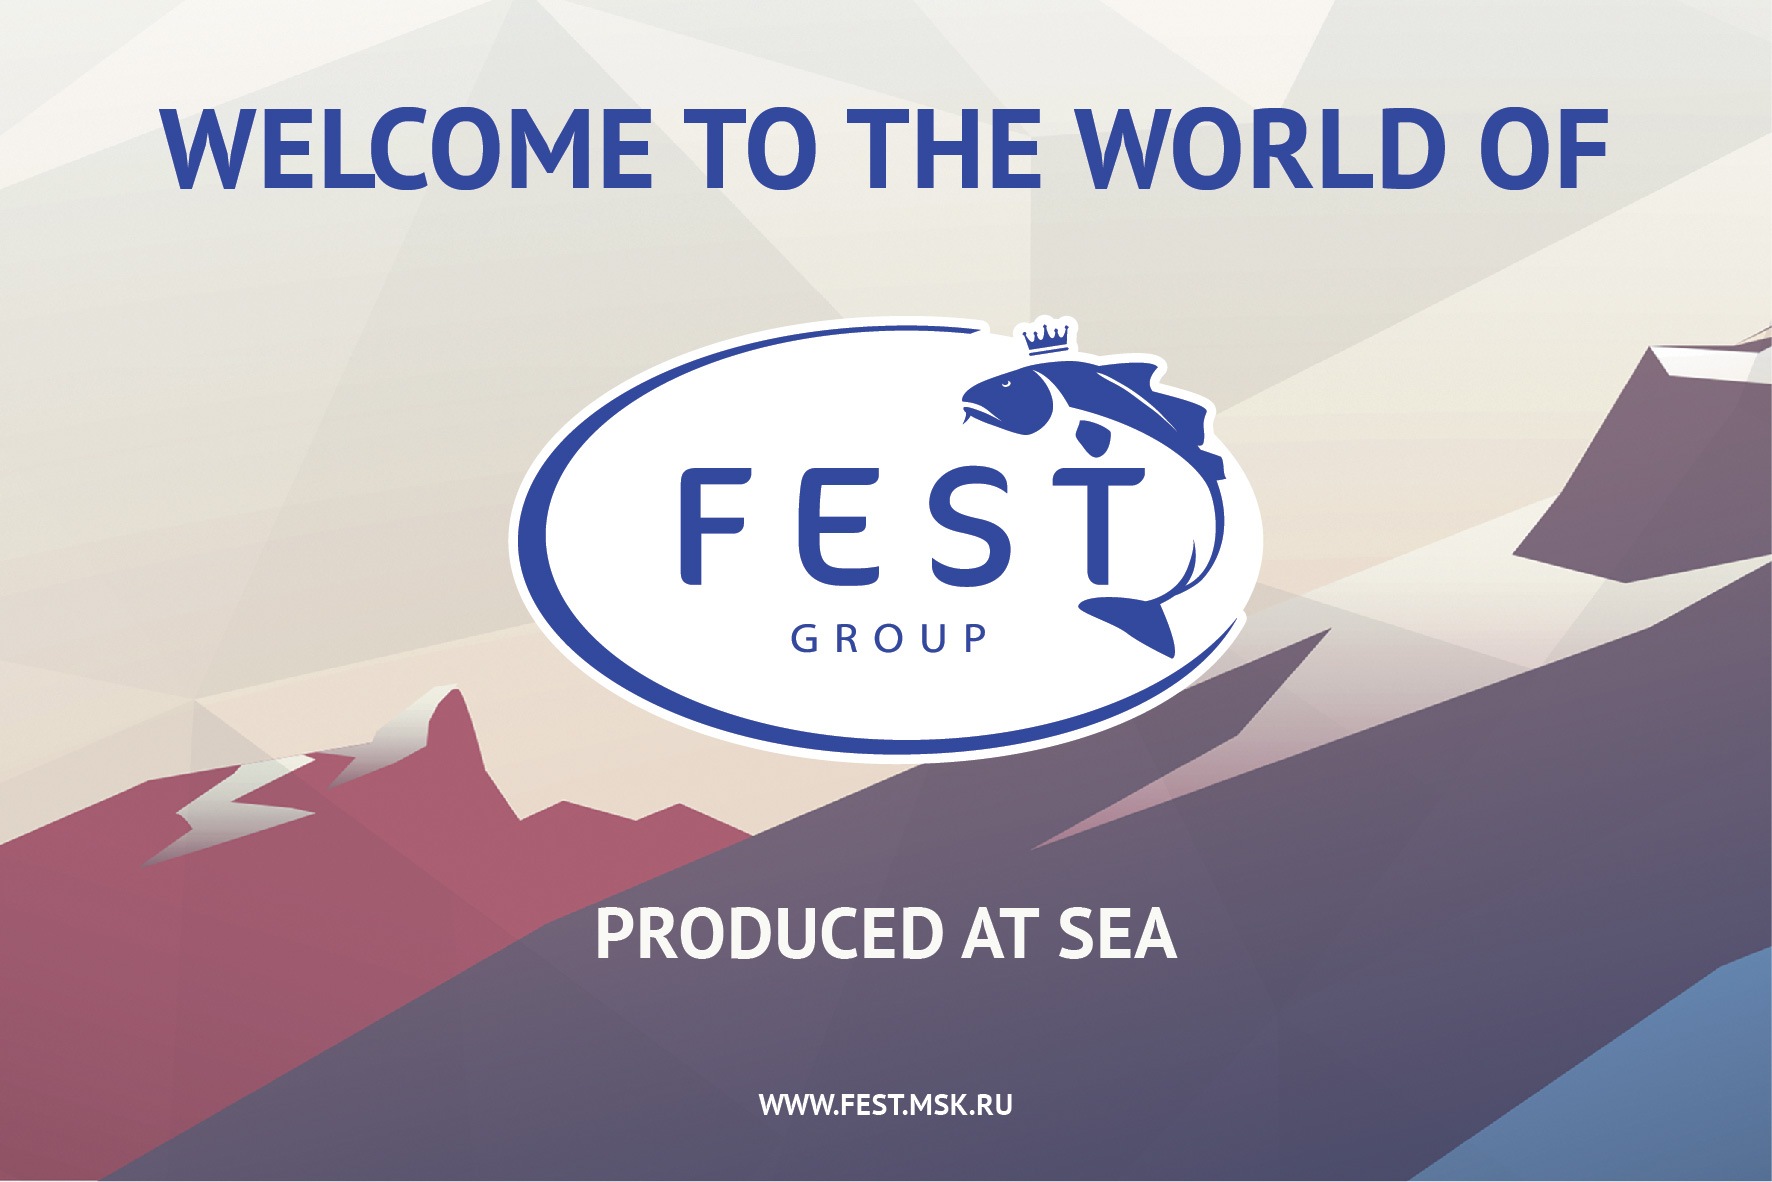 FEST is the strategic partner of Seafood Expo Russia 2021